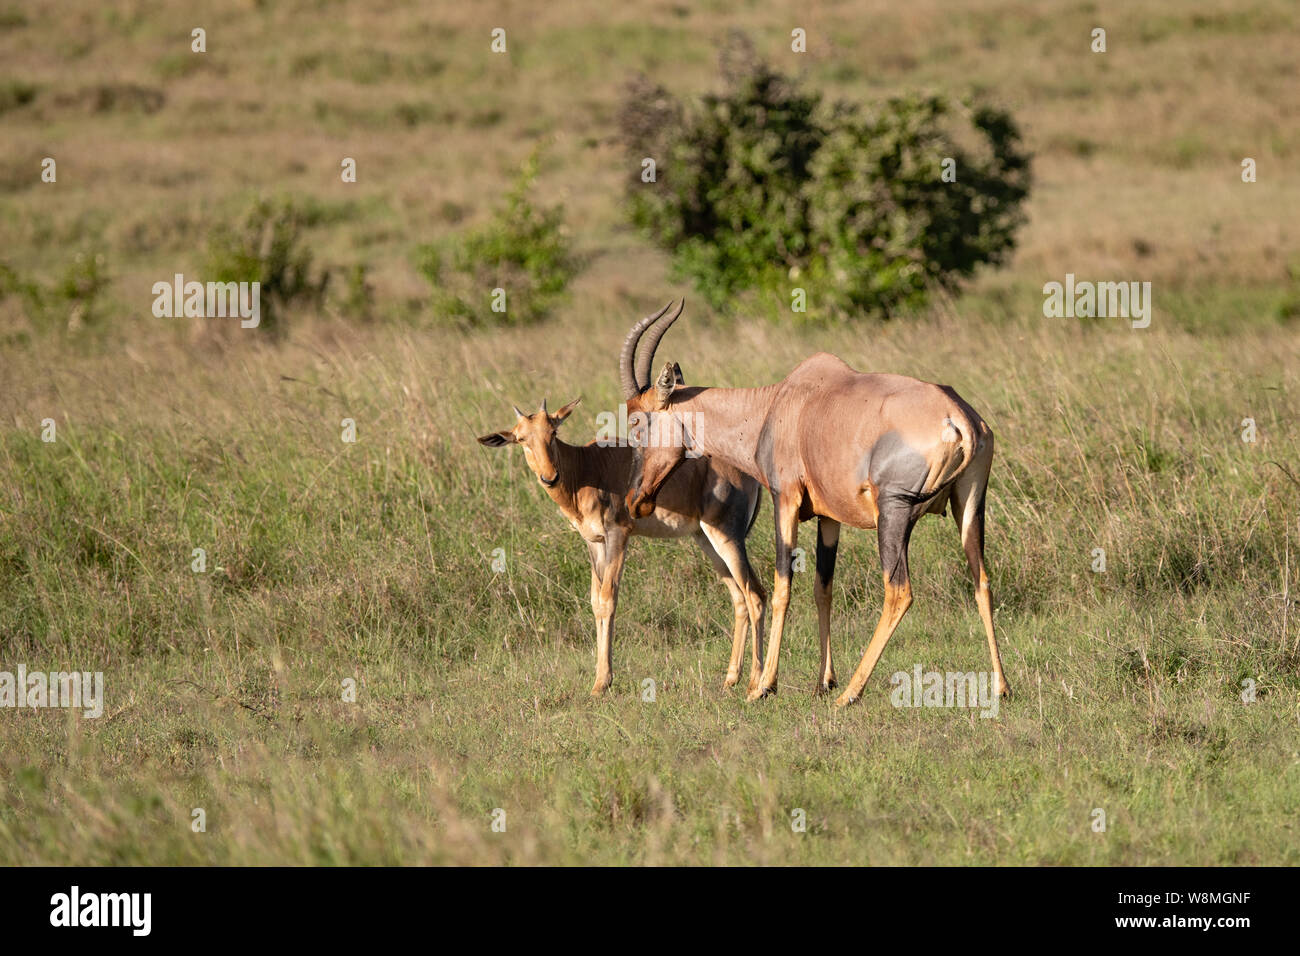 young Topi Gazelle with its mother in the Masai Mara Kenya Stock Photo